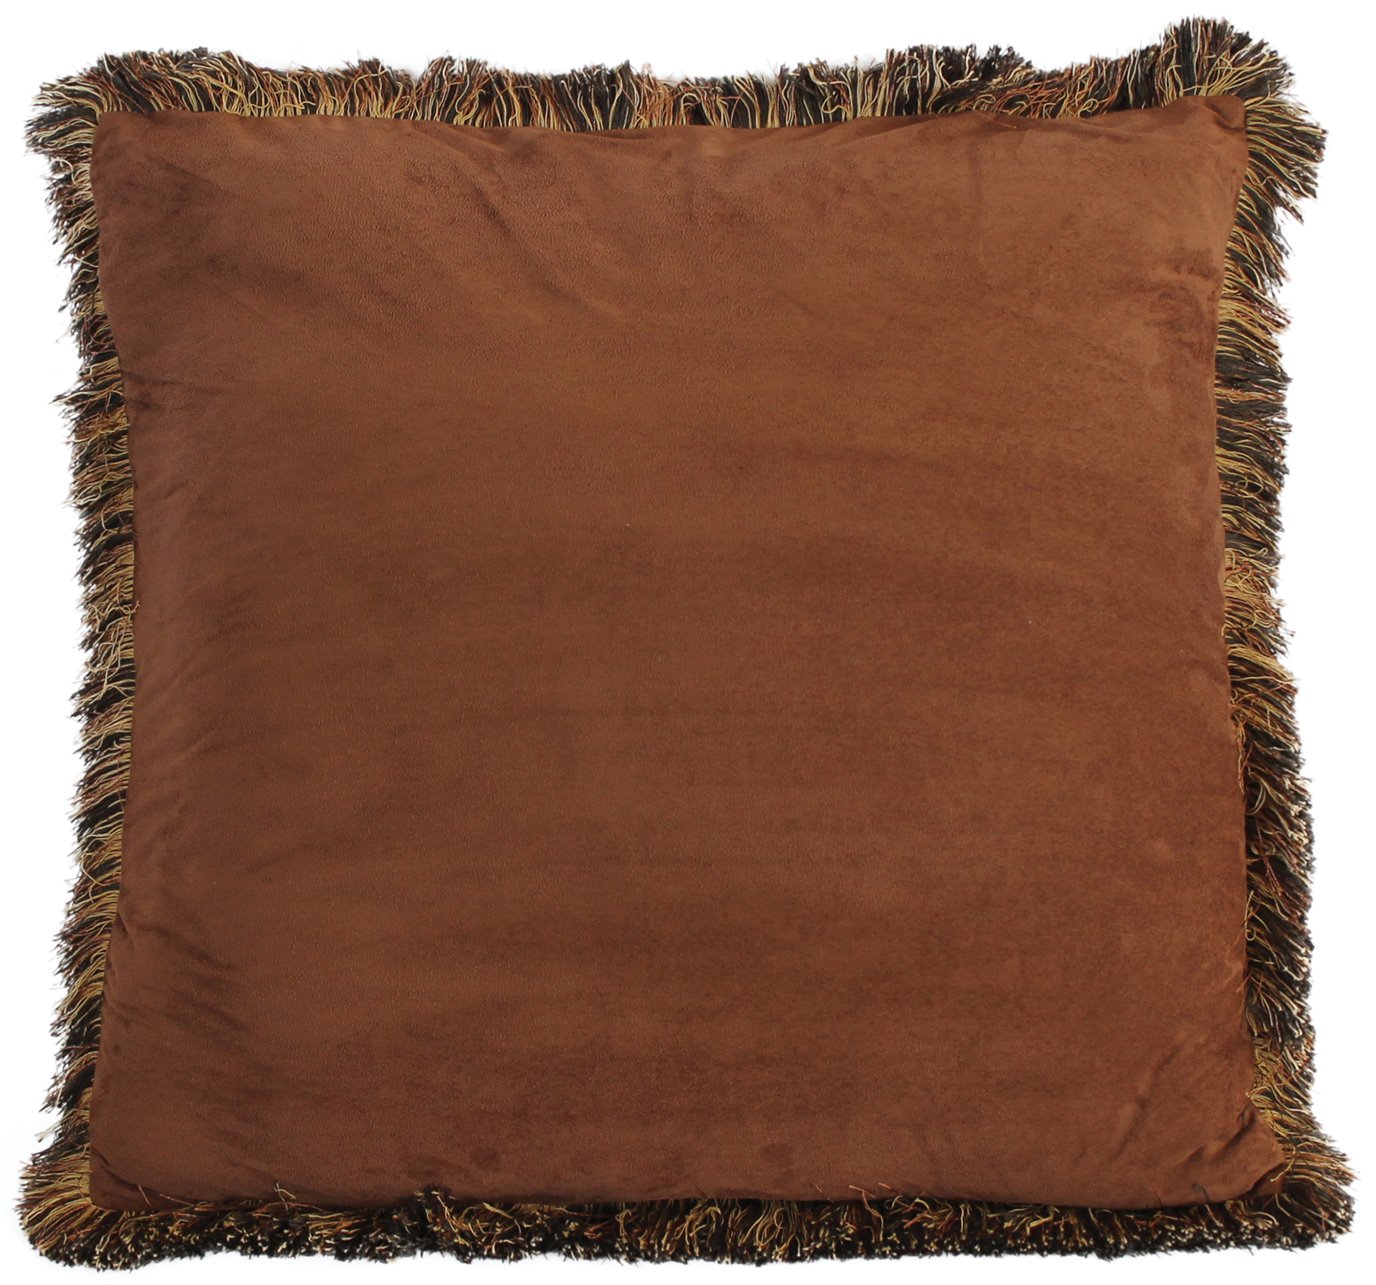 Carstens Autumn Trails Rustic Cabin Euro Pillow Cover 27" x 27"